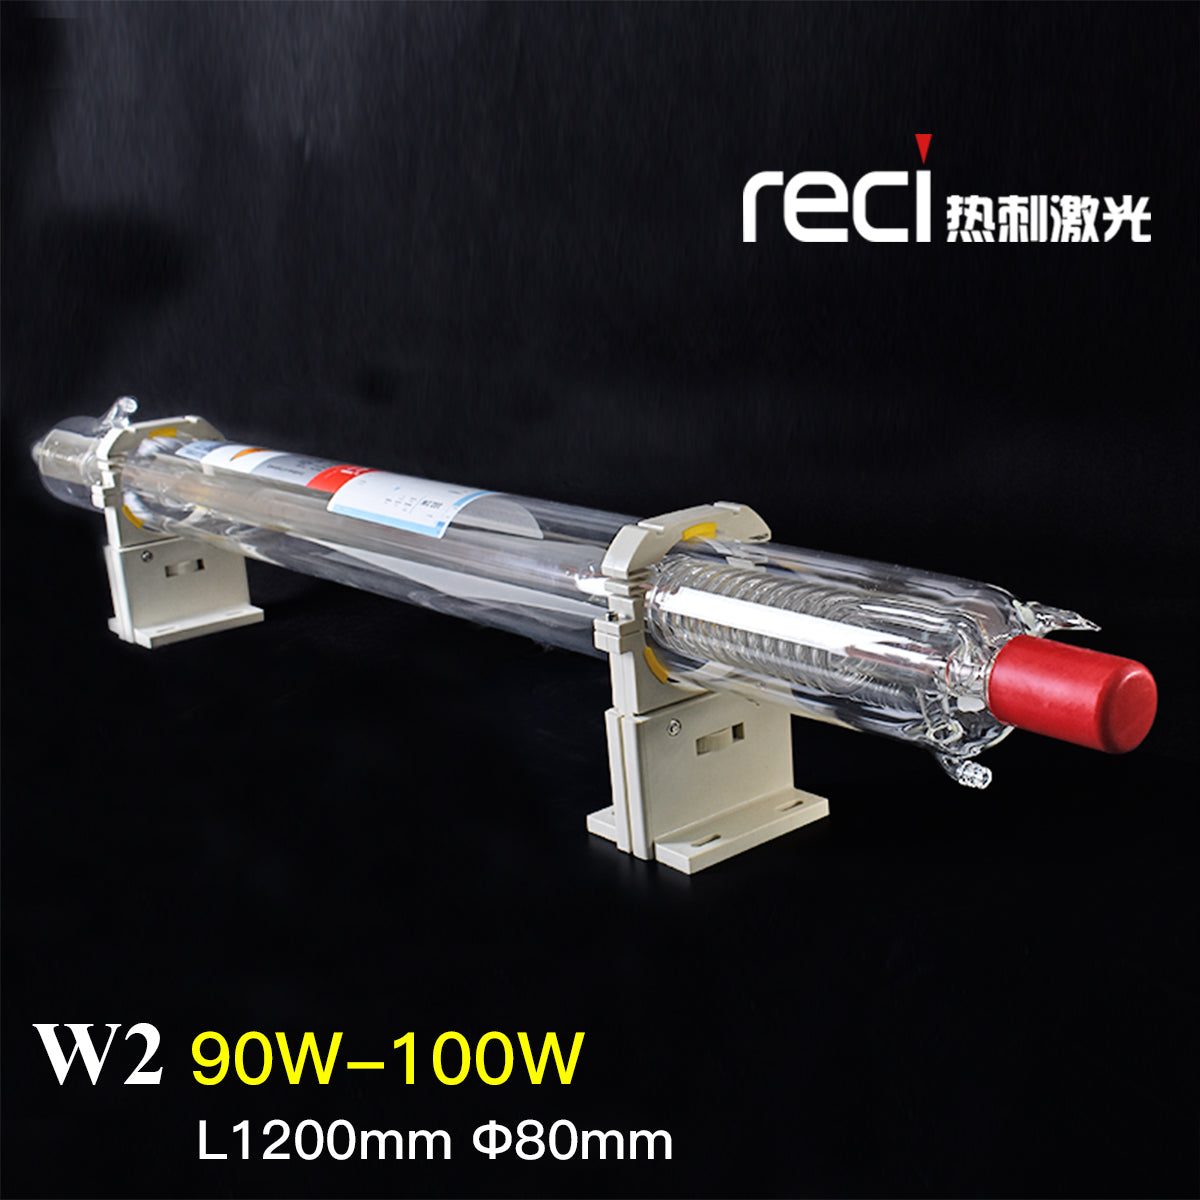 Laser Tube Reci W2 T2 100W CO2 Lamp Dia 80mm S2 Z2 V2 For 80W 90W Engraver Marking Machine Matching With DY13 Laser Power Supply